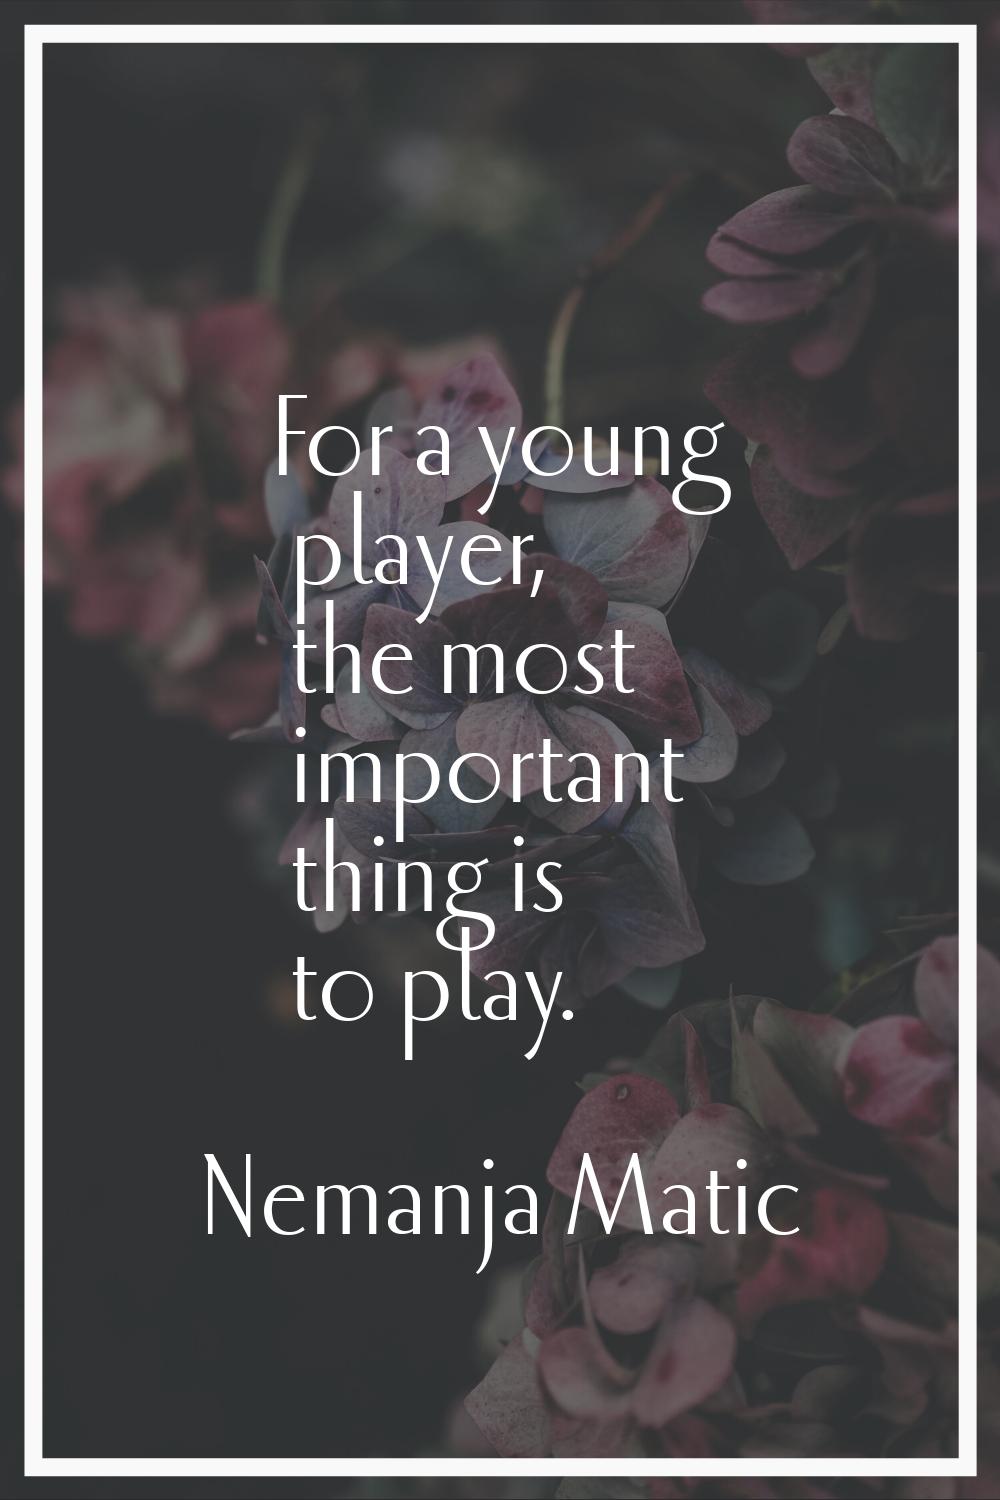 For a young player, the most important thing is to play.